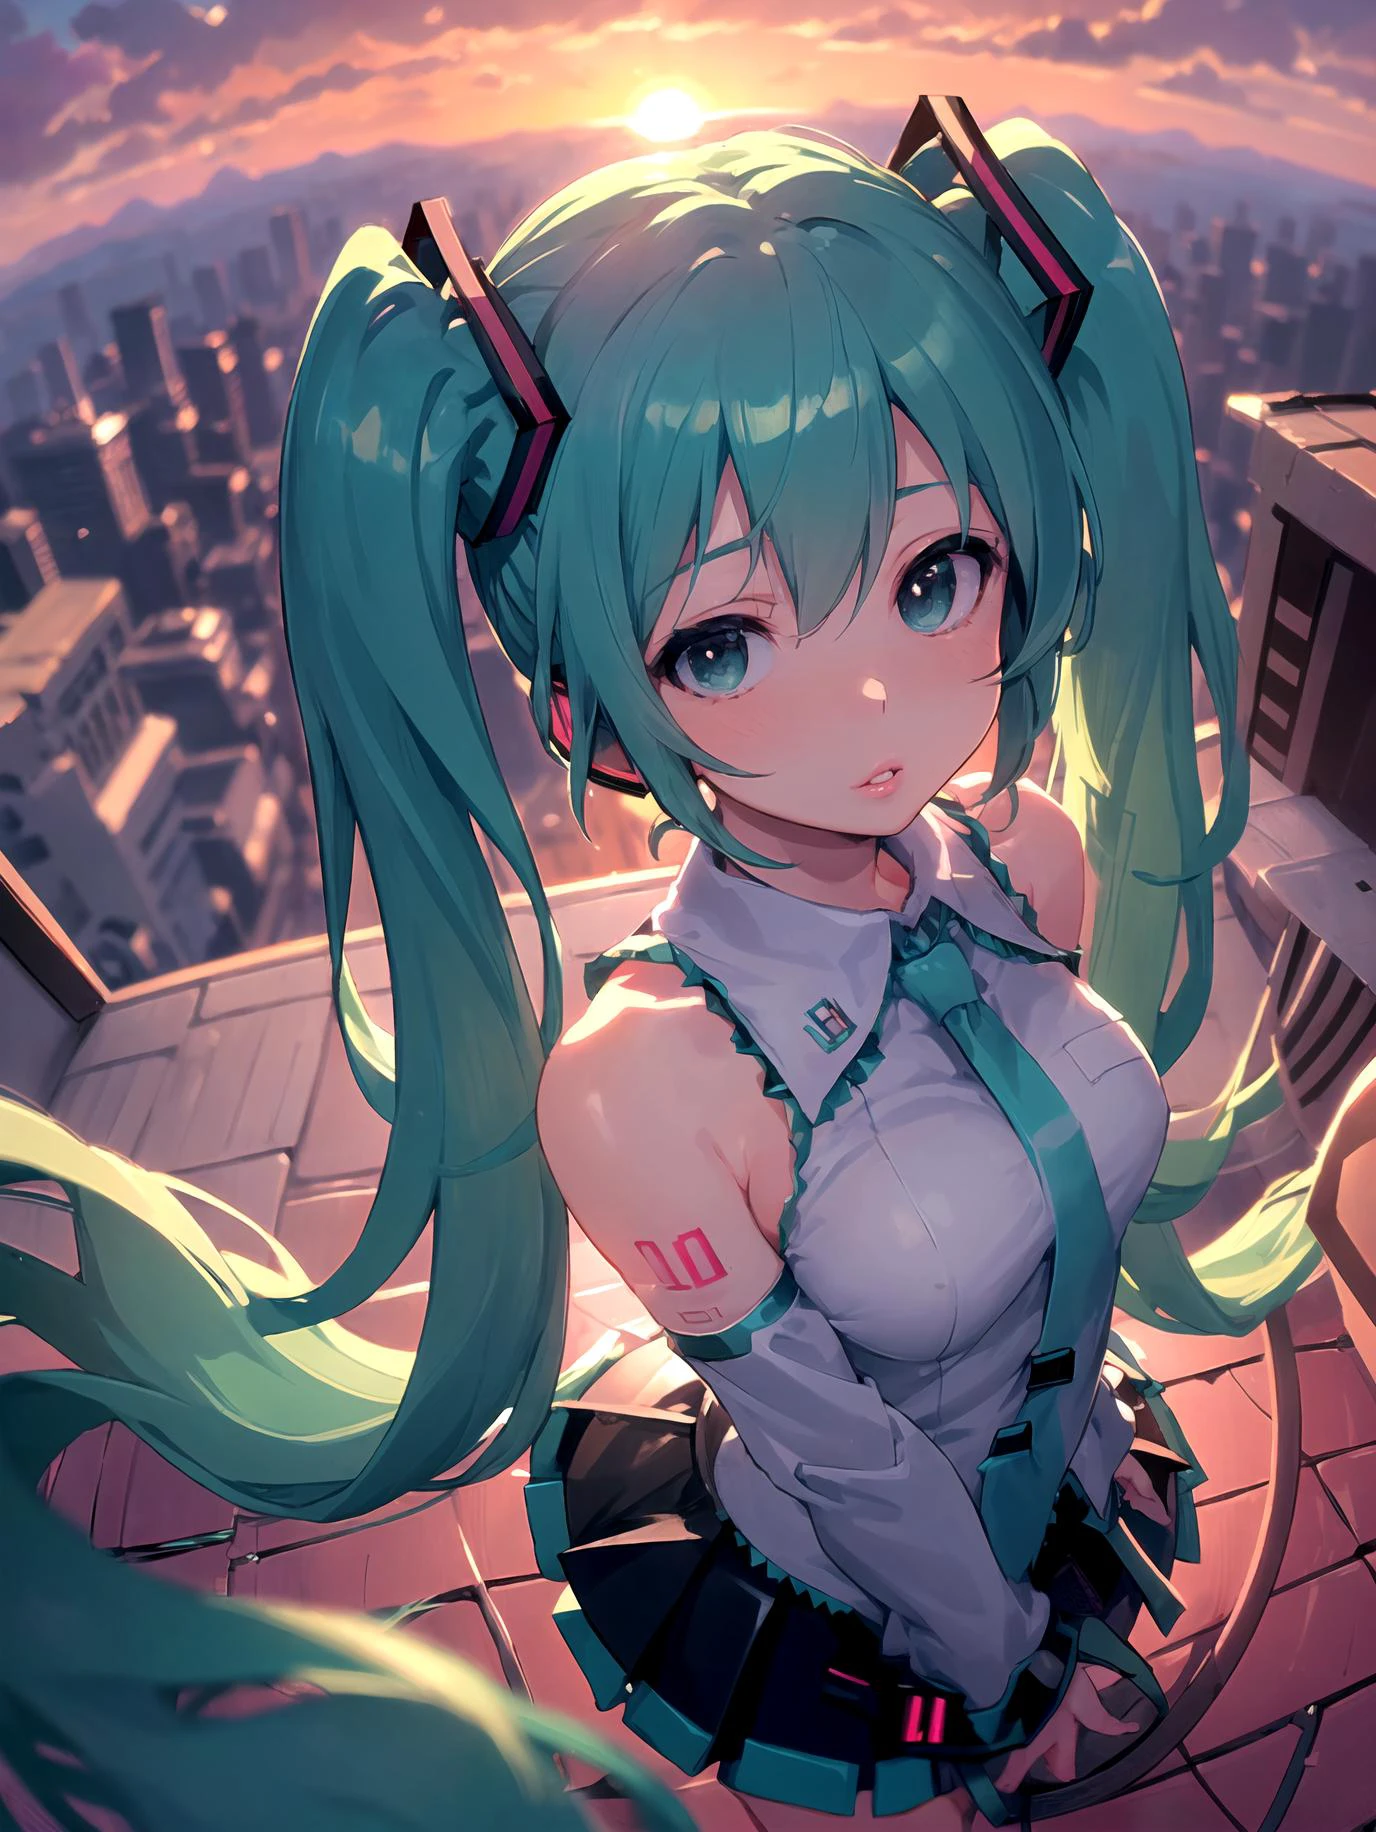 ((masterpiece))((sfw))
(best_quality)
(fisheye) (from_above)
(blurry_background) (depth_of_field)
(caustics)
(outdoors) (rooftop) (sunset) (backlighting) (sunlight)
                                 (Hatsune Miku) (twintails)
(parted_lips)